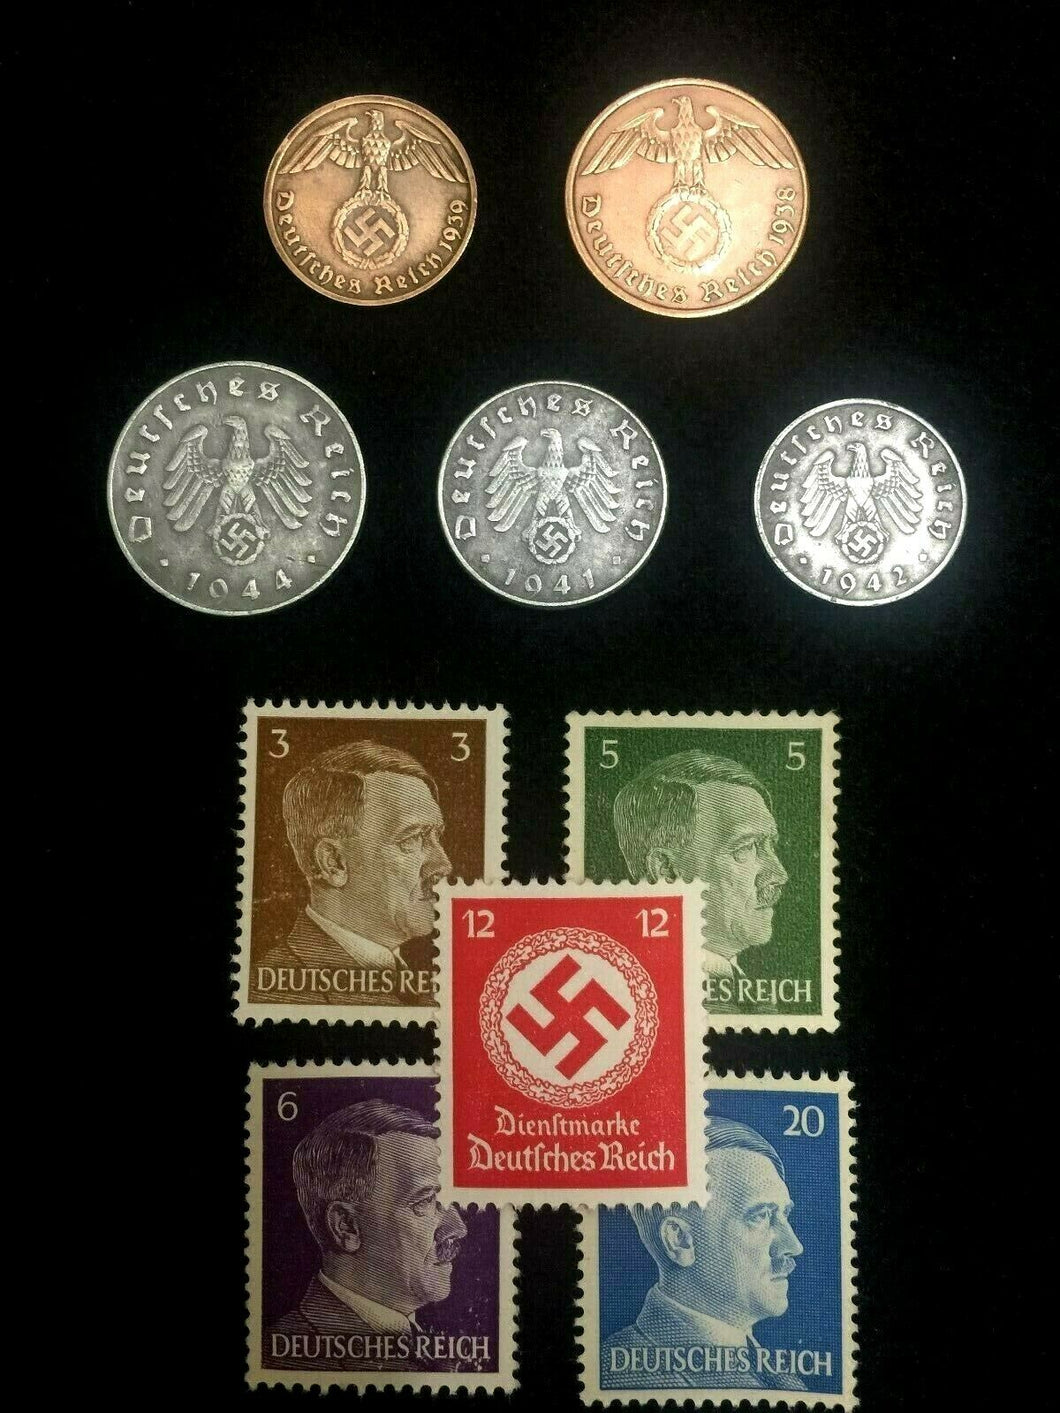 Authentic Rare Nazi Third Reich German Coins and Unused Stamps - WWII Artifacts